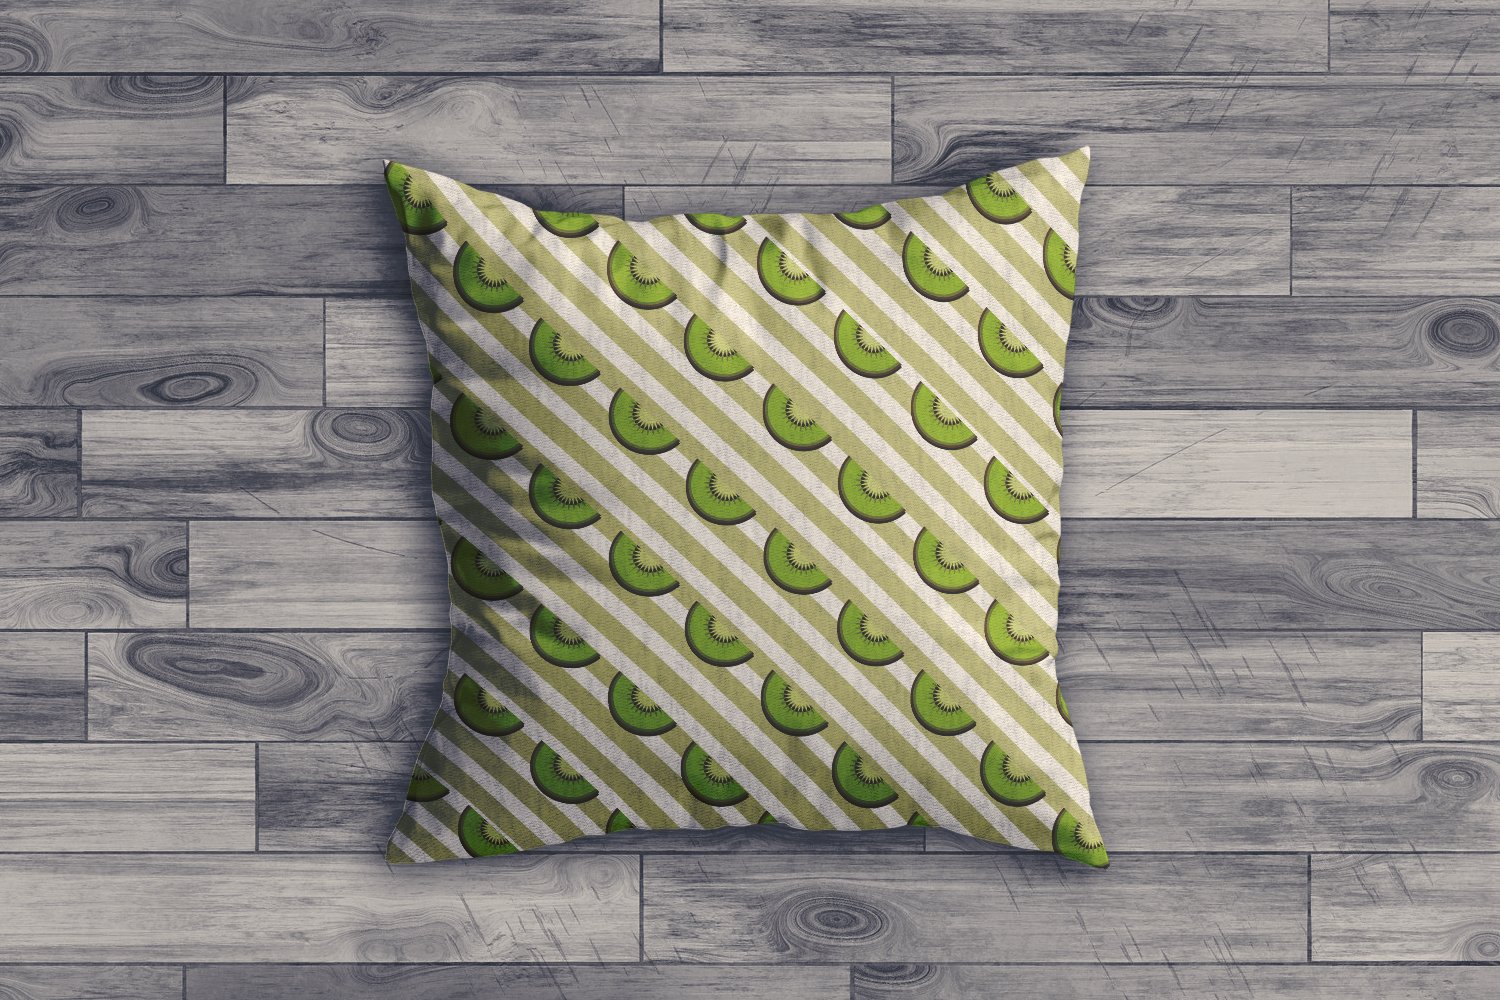 Small decorate pillow with the kiwi half.